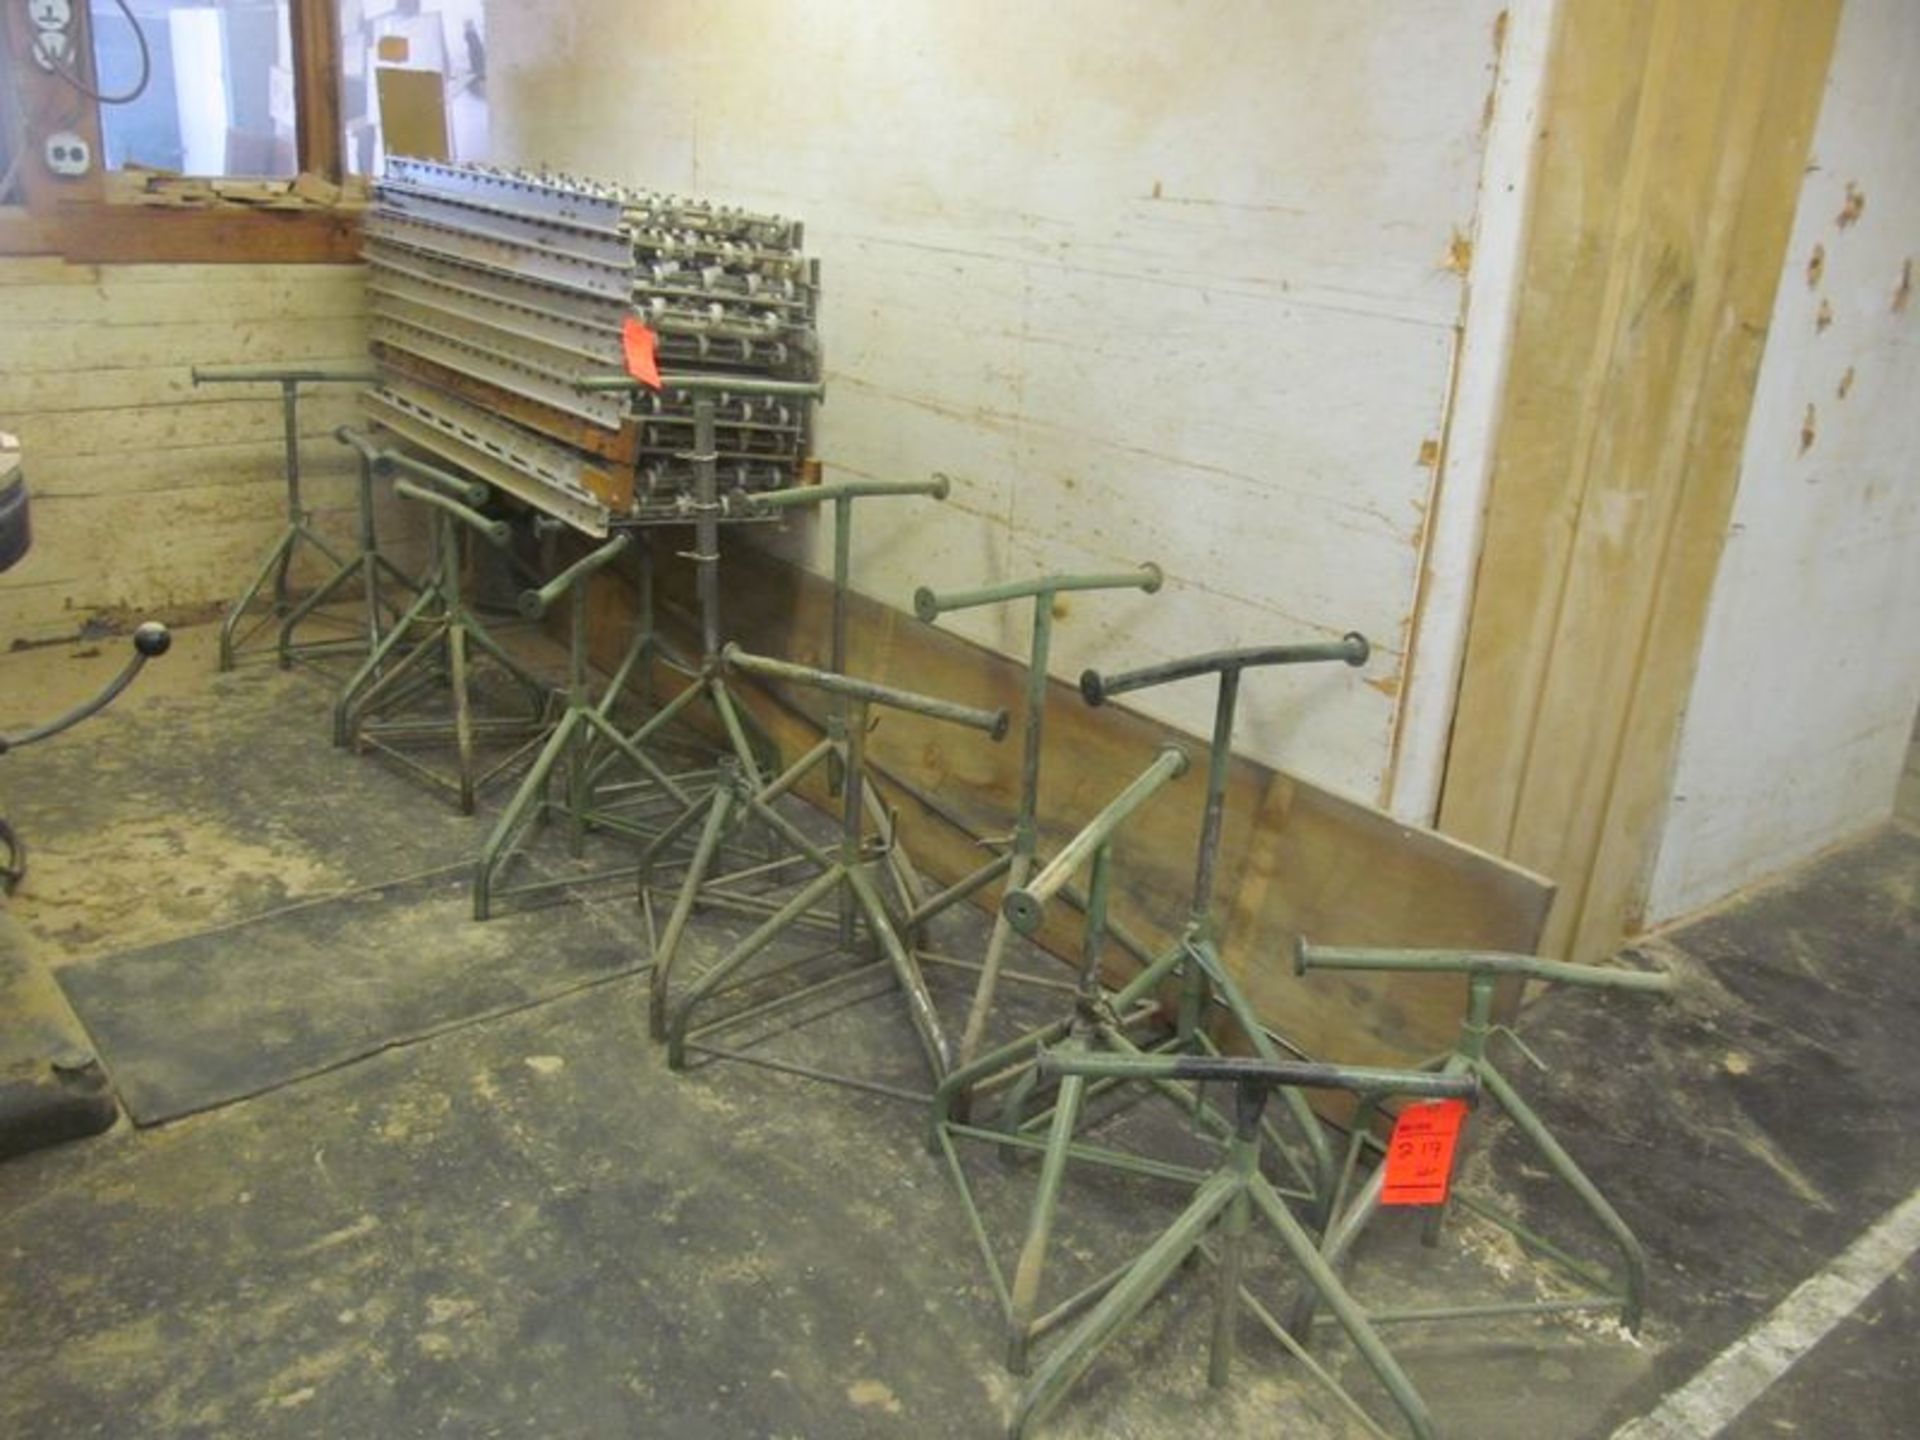 Lot ass't aluminum skate conveyor with (8) 16" X 62" sections, (1) 16" X 56" section, (1) 16" X